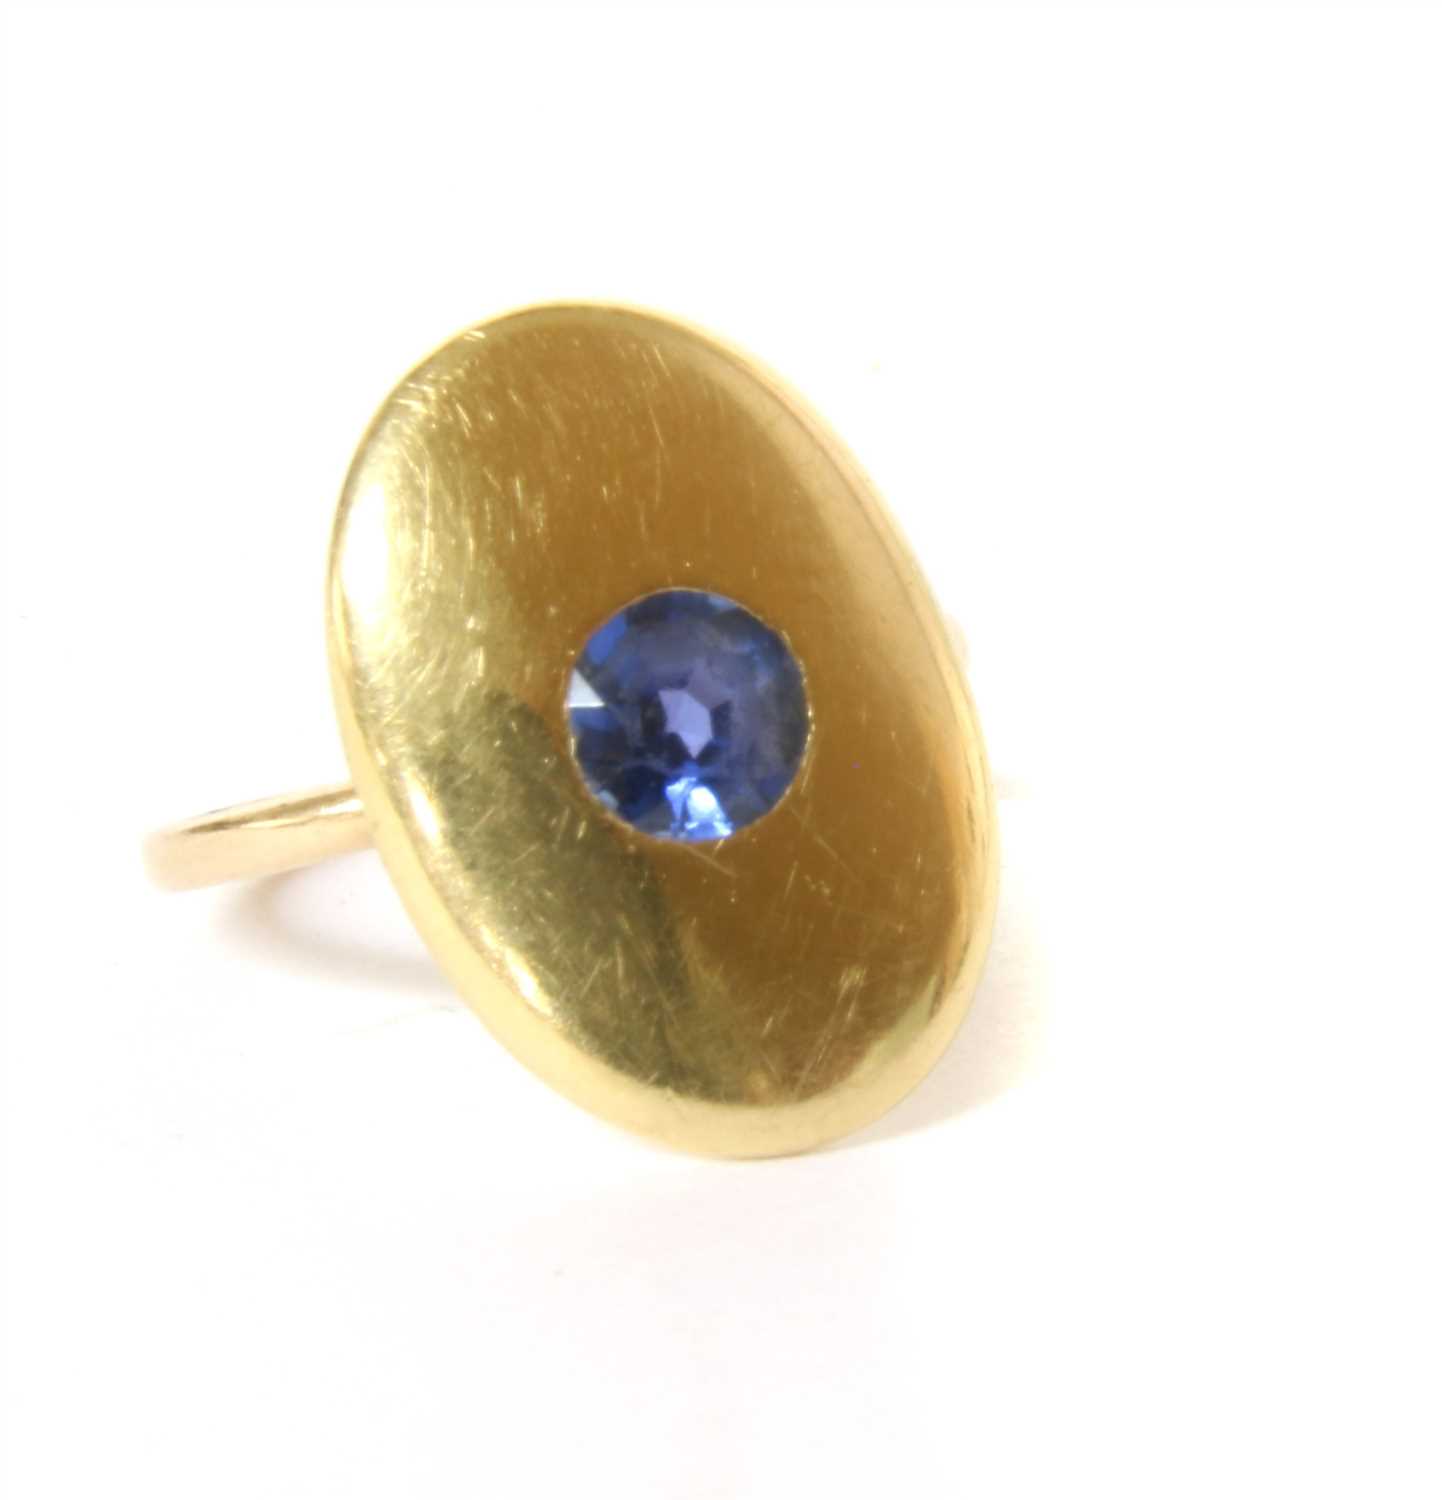 Lot 1 - An oval cufflink later converted to a ring